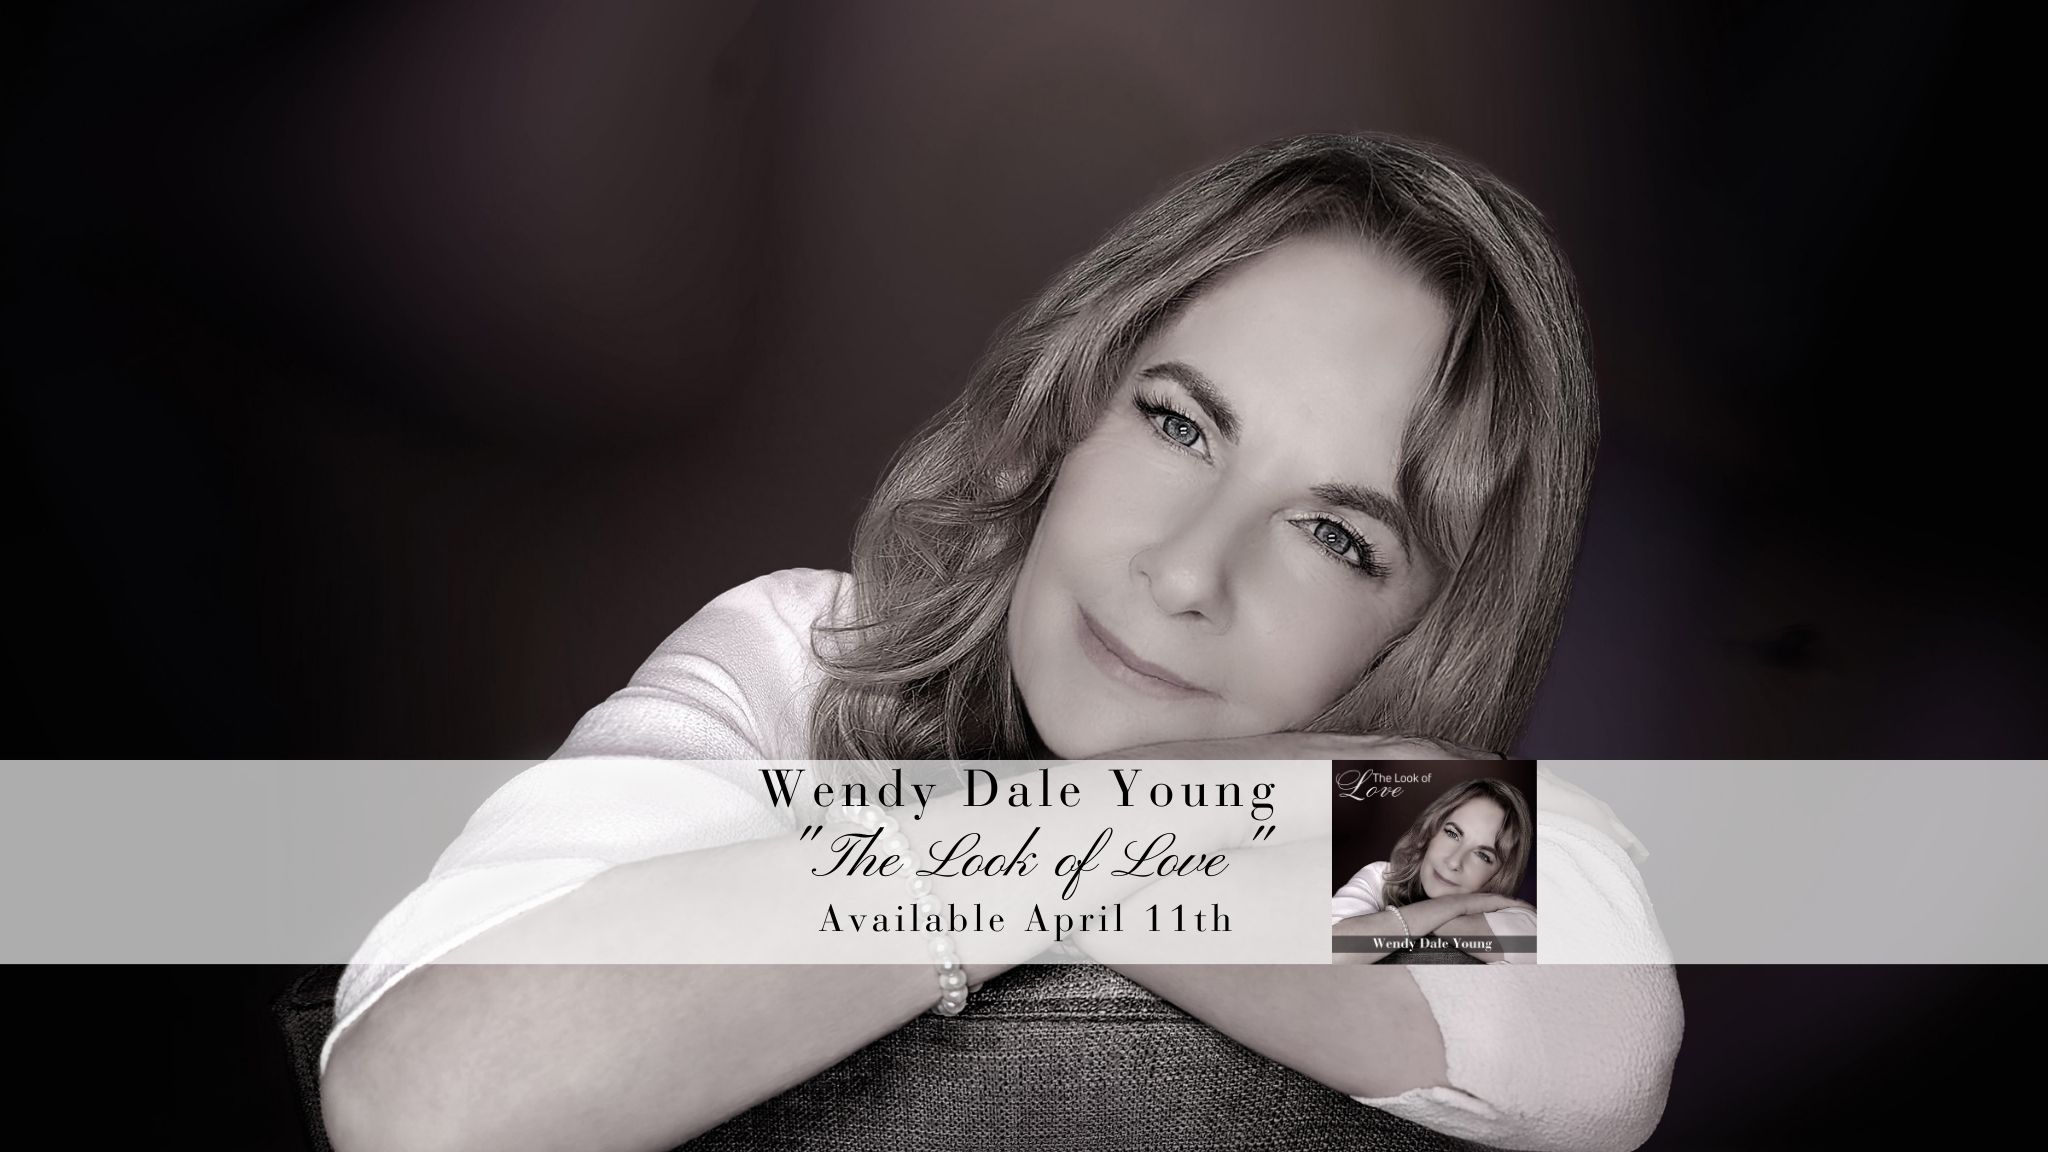 Wendy Dale Young (YouTube Banner) (2048 × 1152 px)